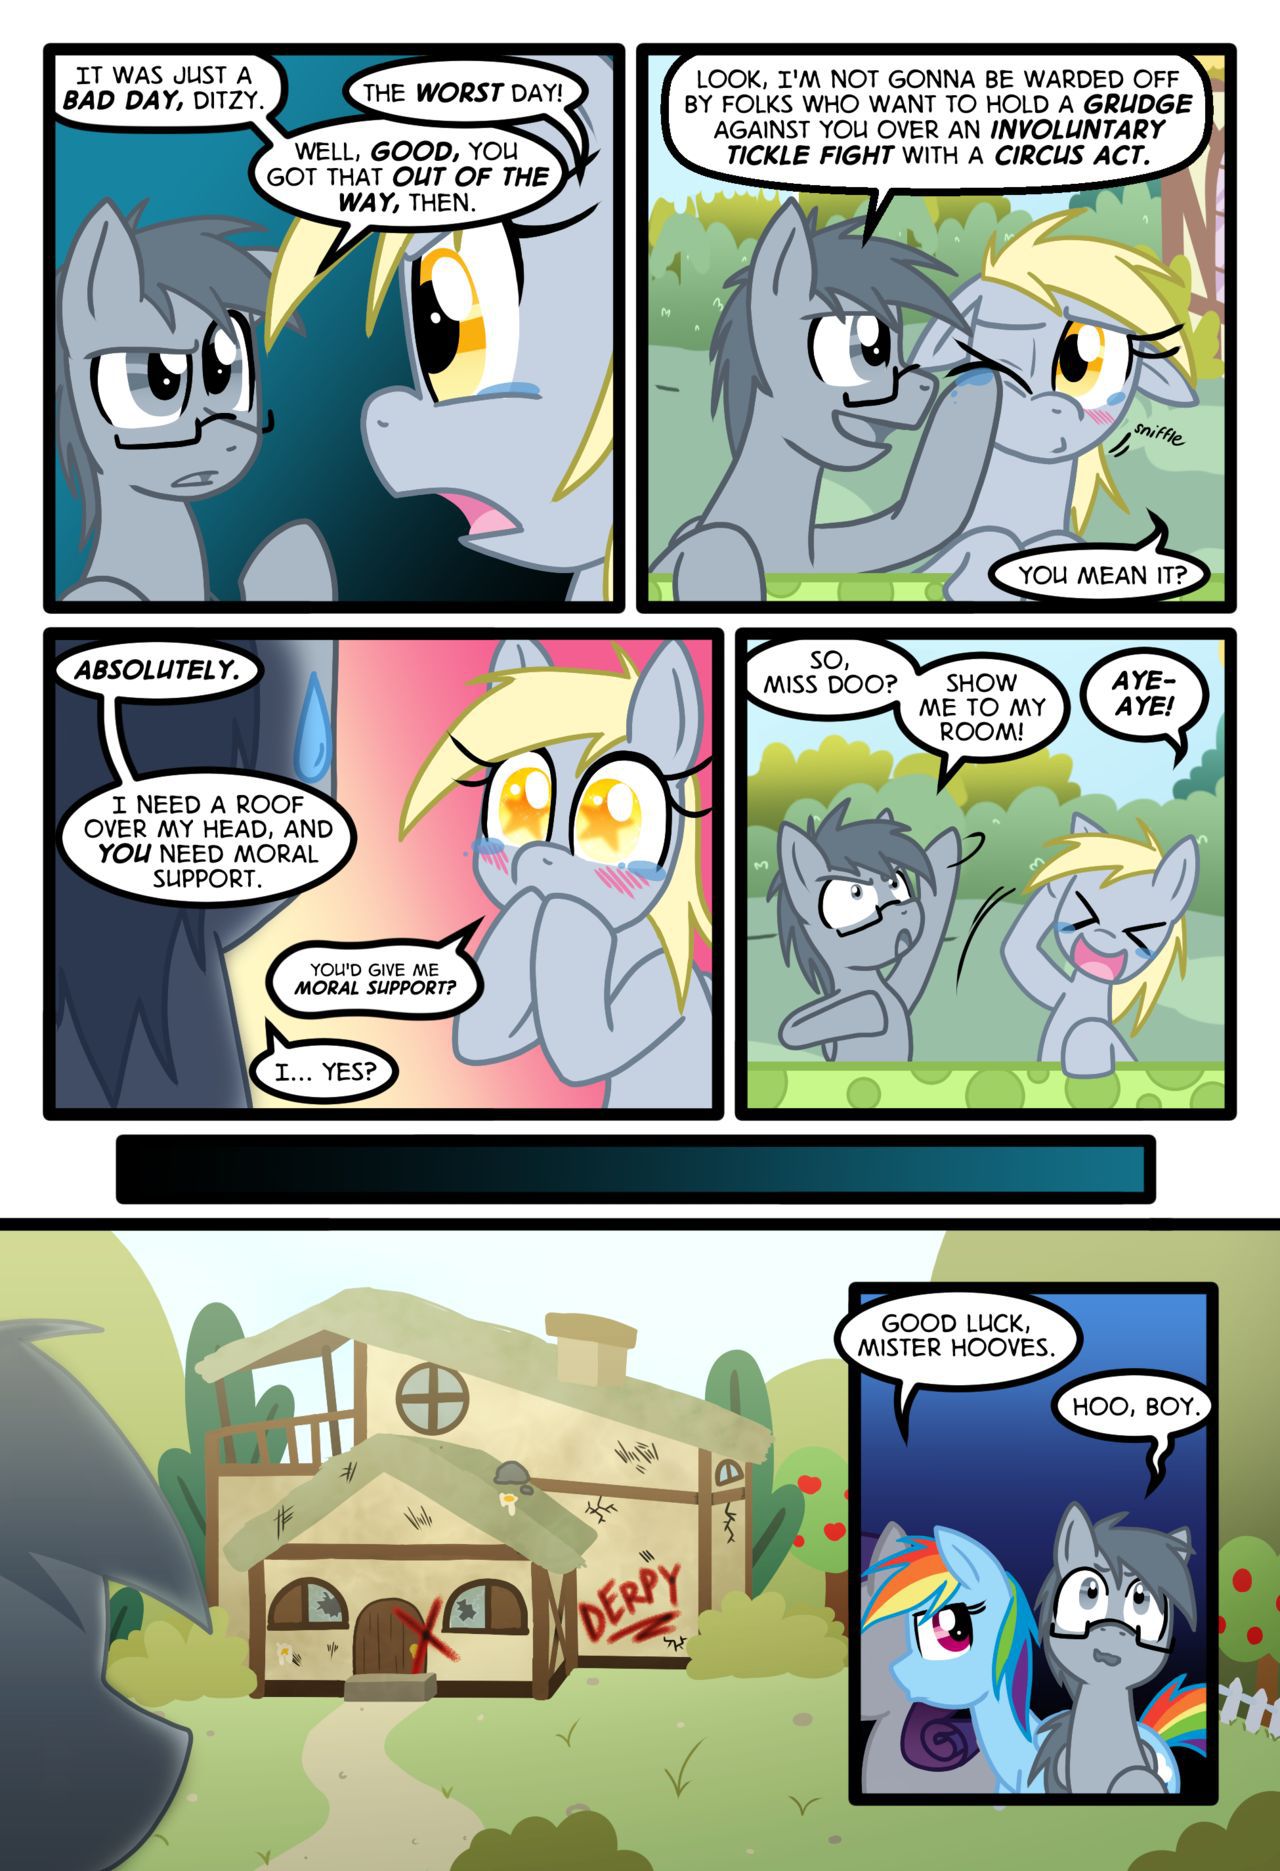 [Zaron] Lonely Hooves (My Little Pony Friendship Is Magic) [Ongoing] 69